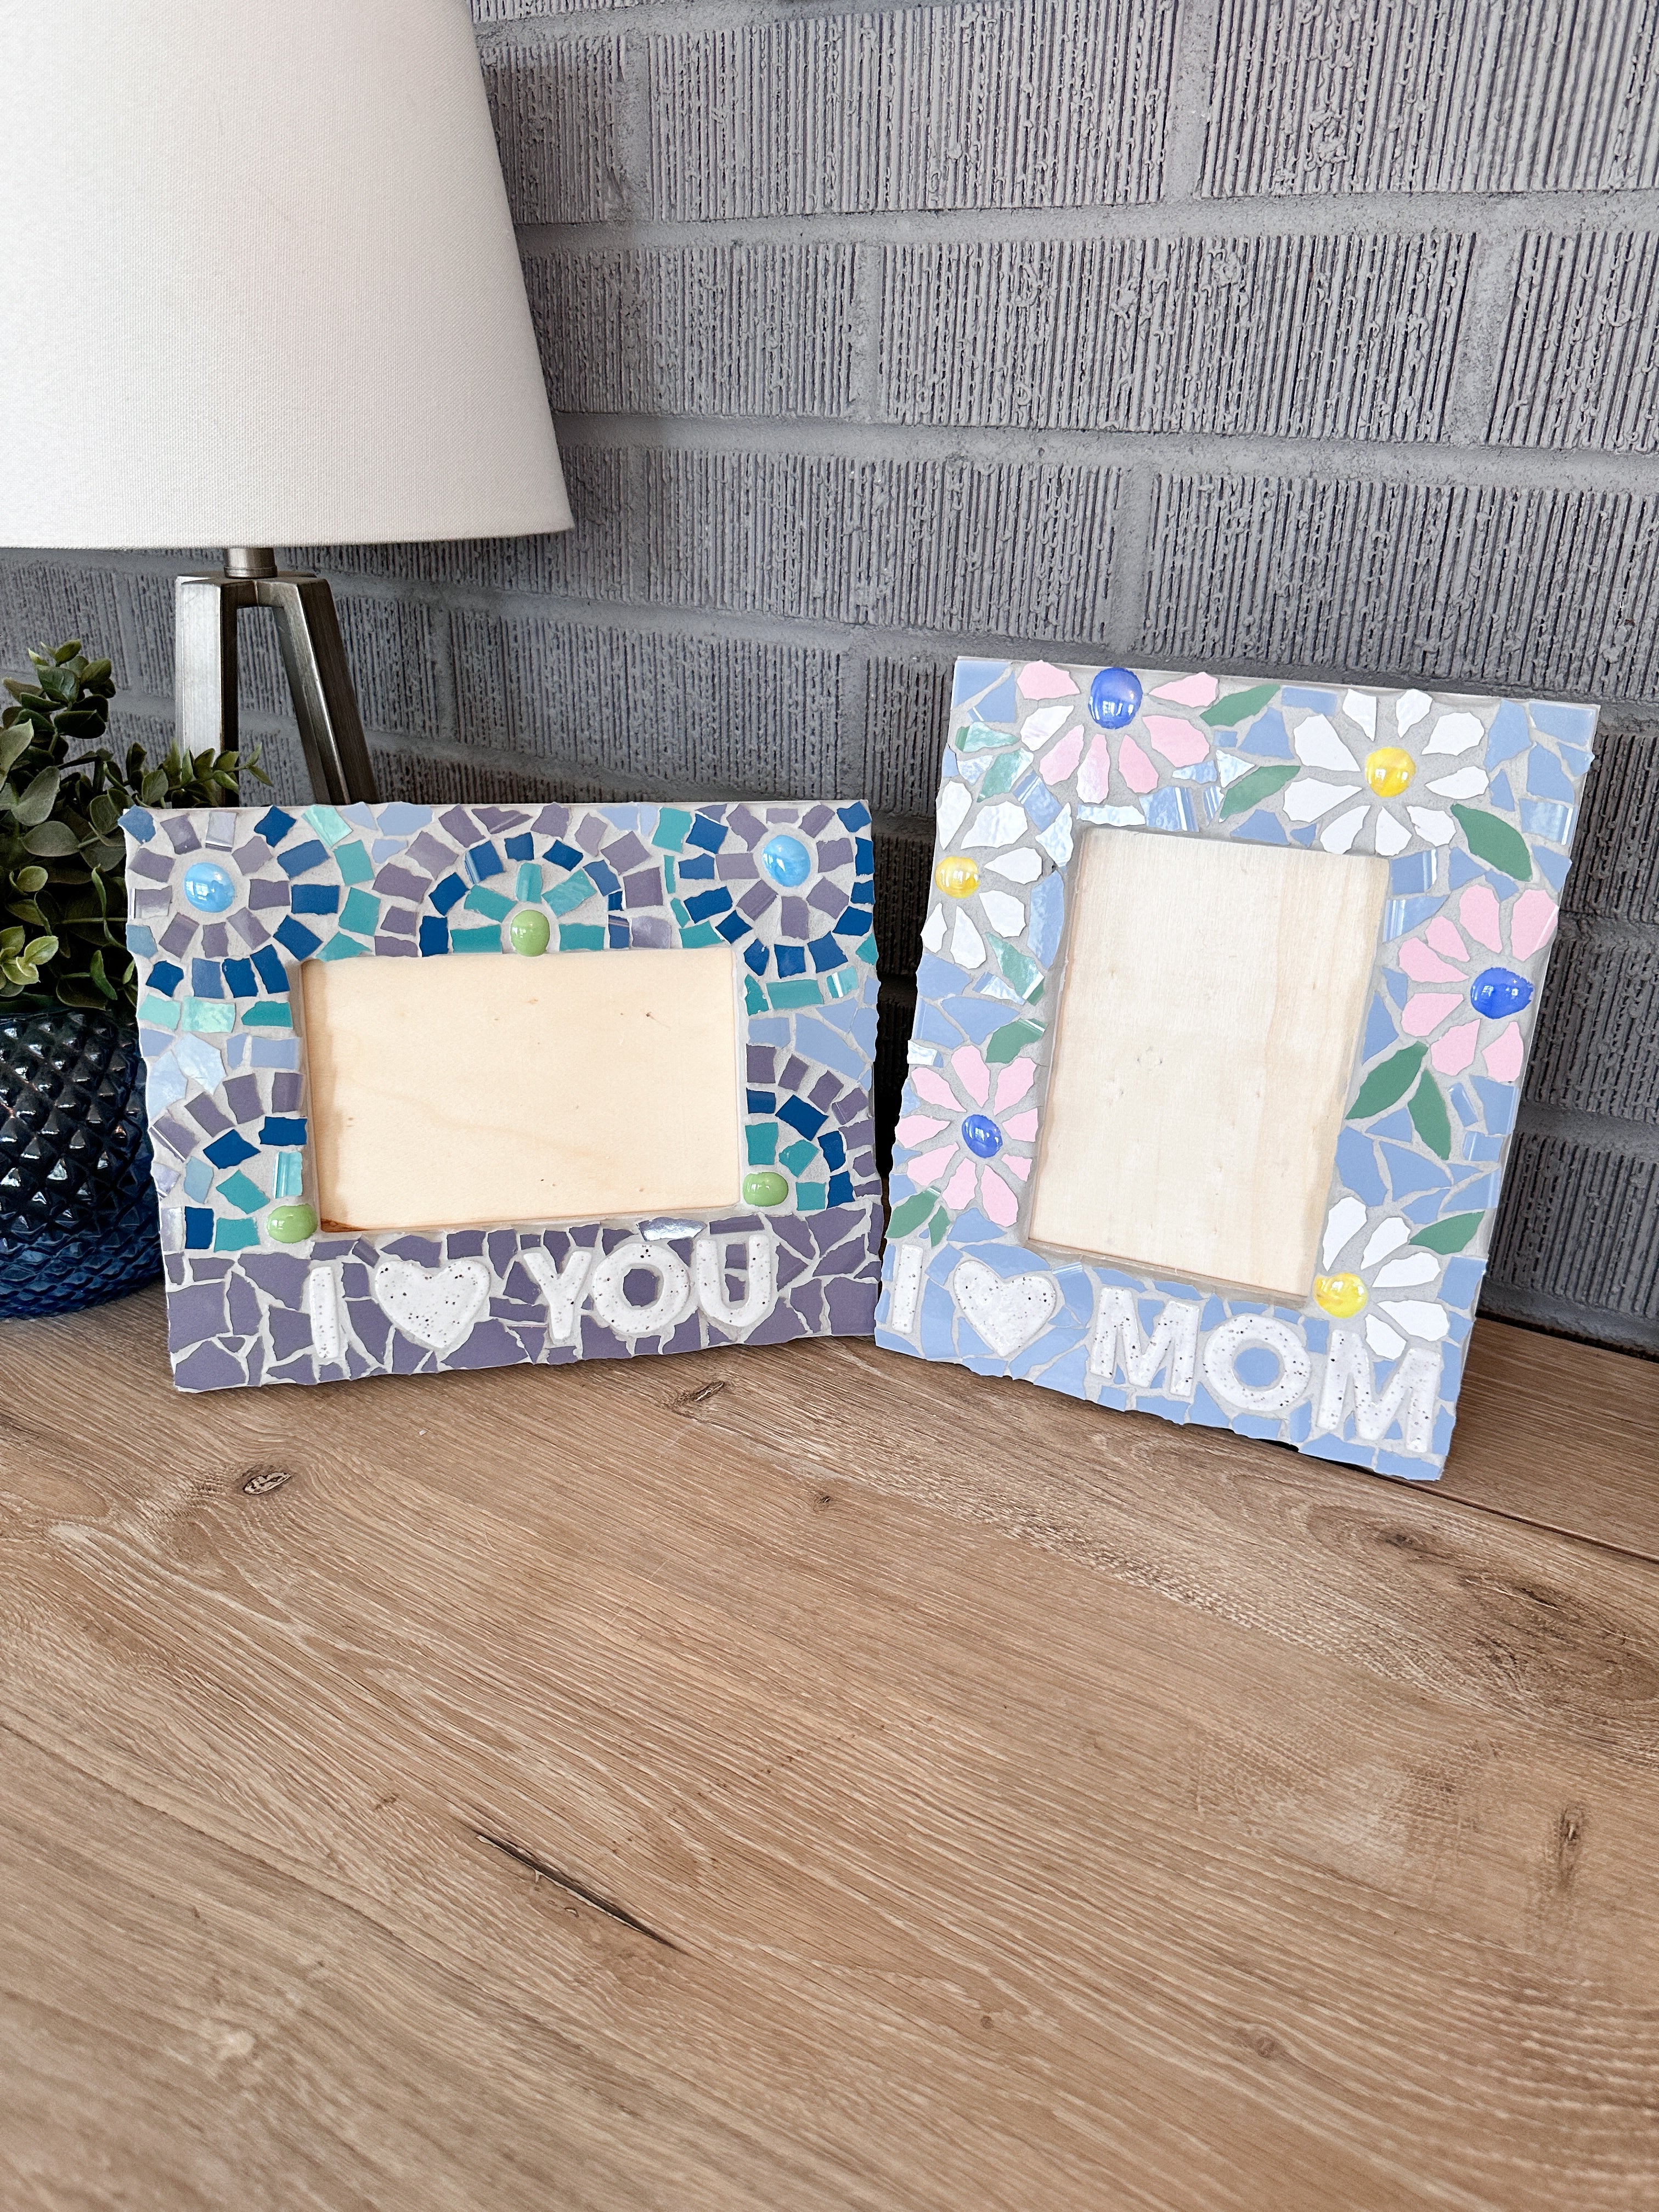 May 11 | Mother's Day Mosaic Picture Frame Workshop